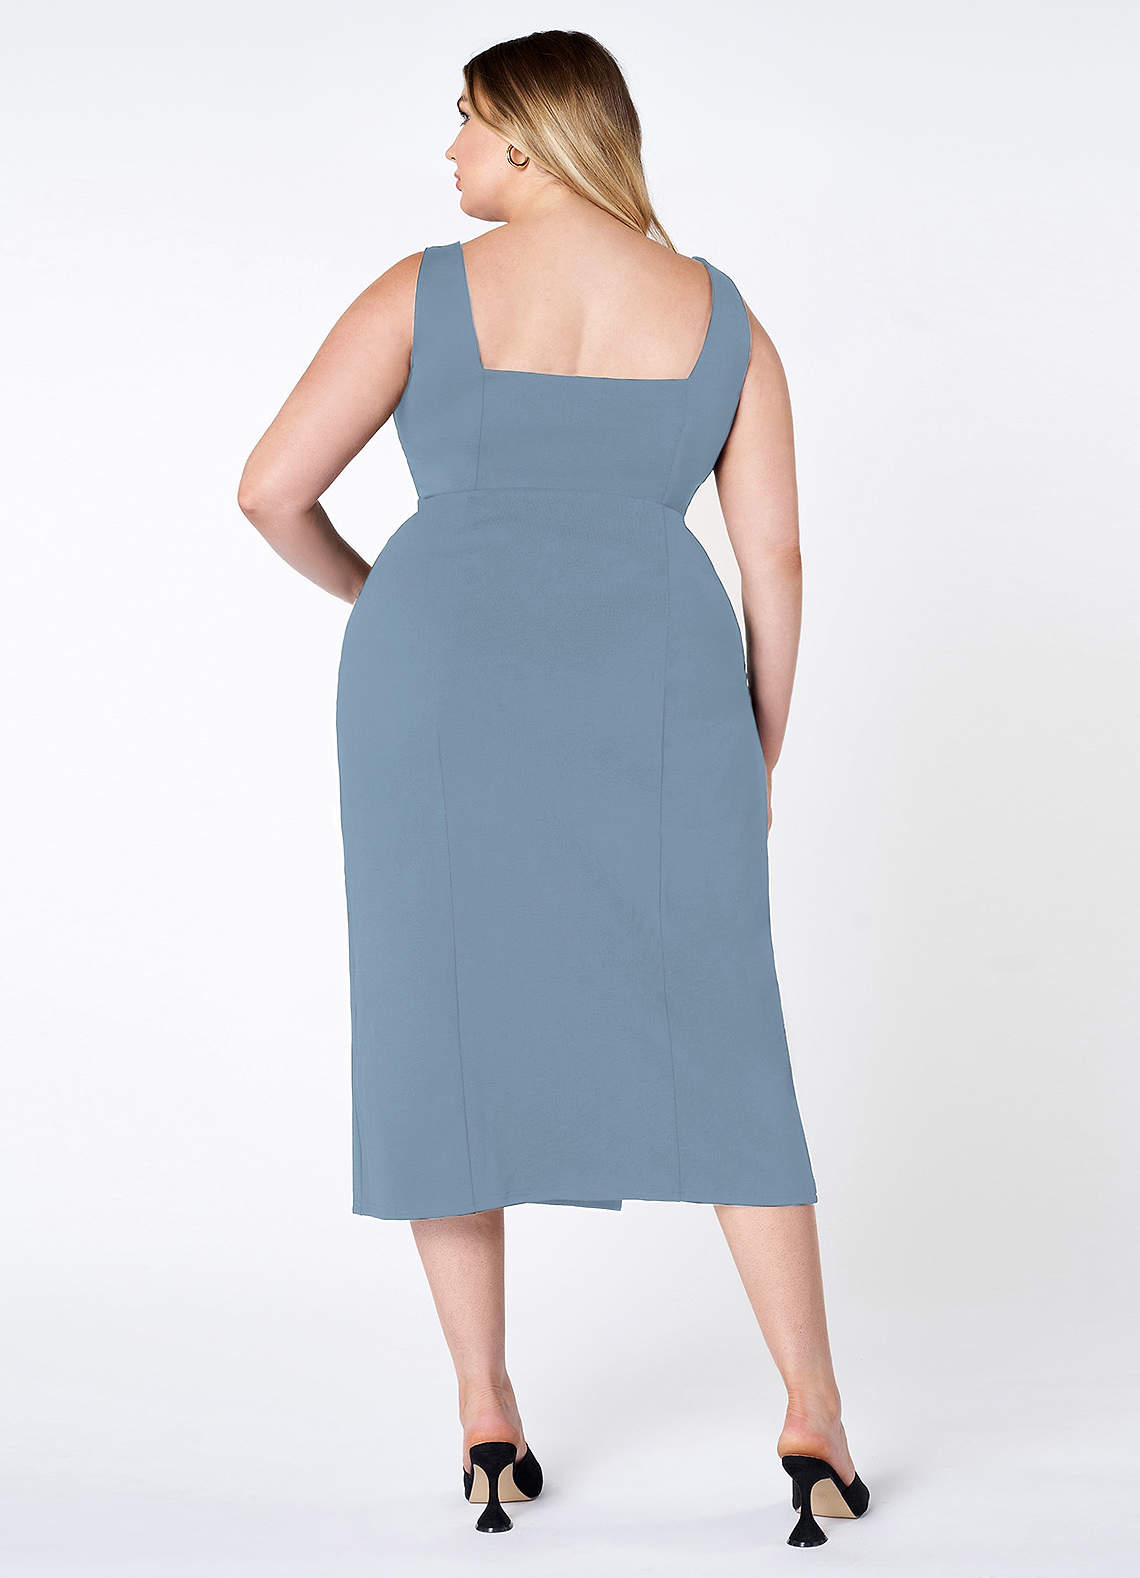 Sight To See Dusty Blue Bodycon Midi Dress image1